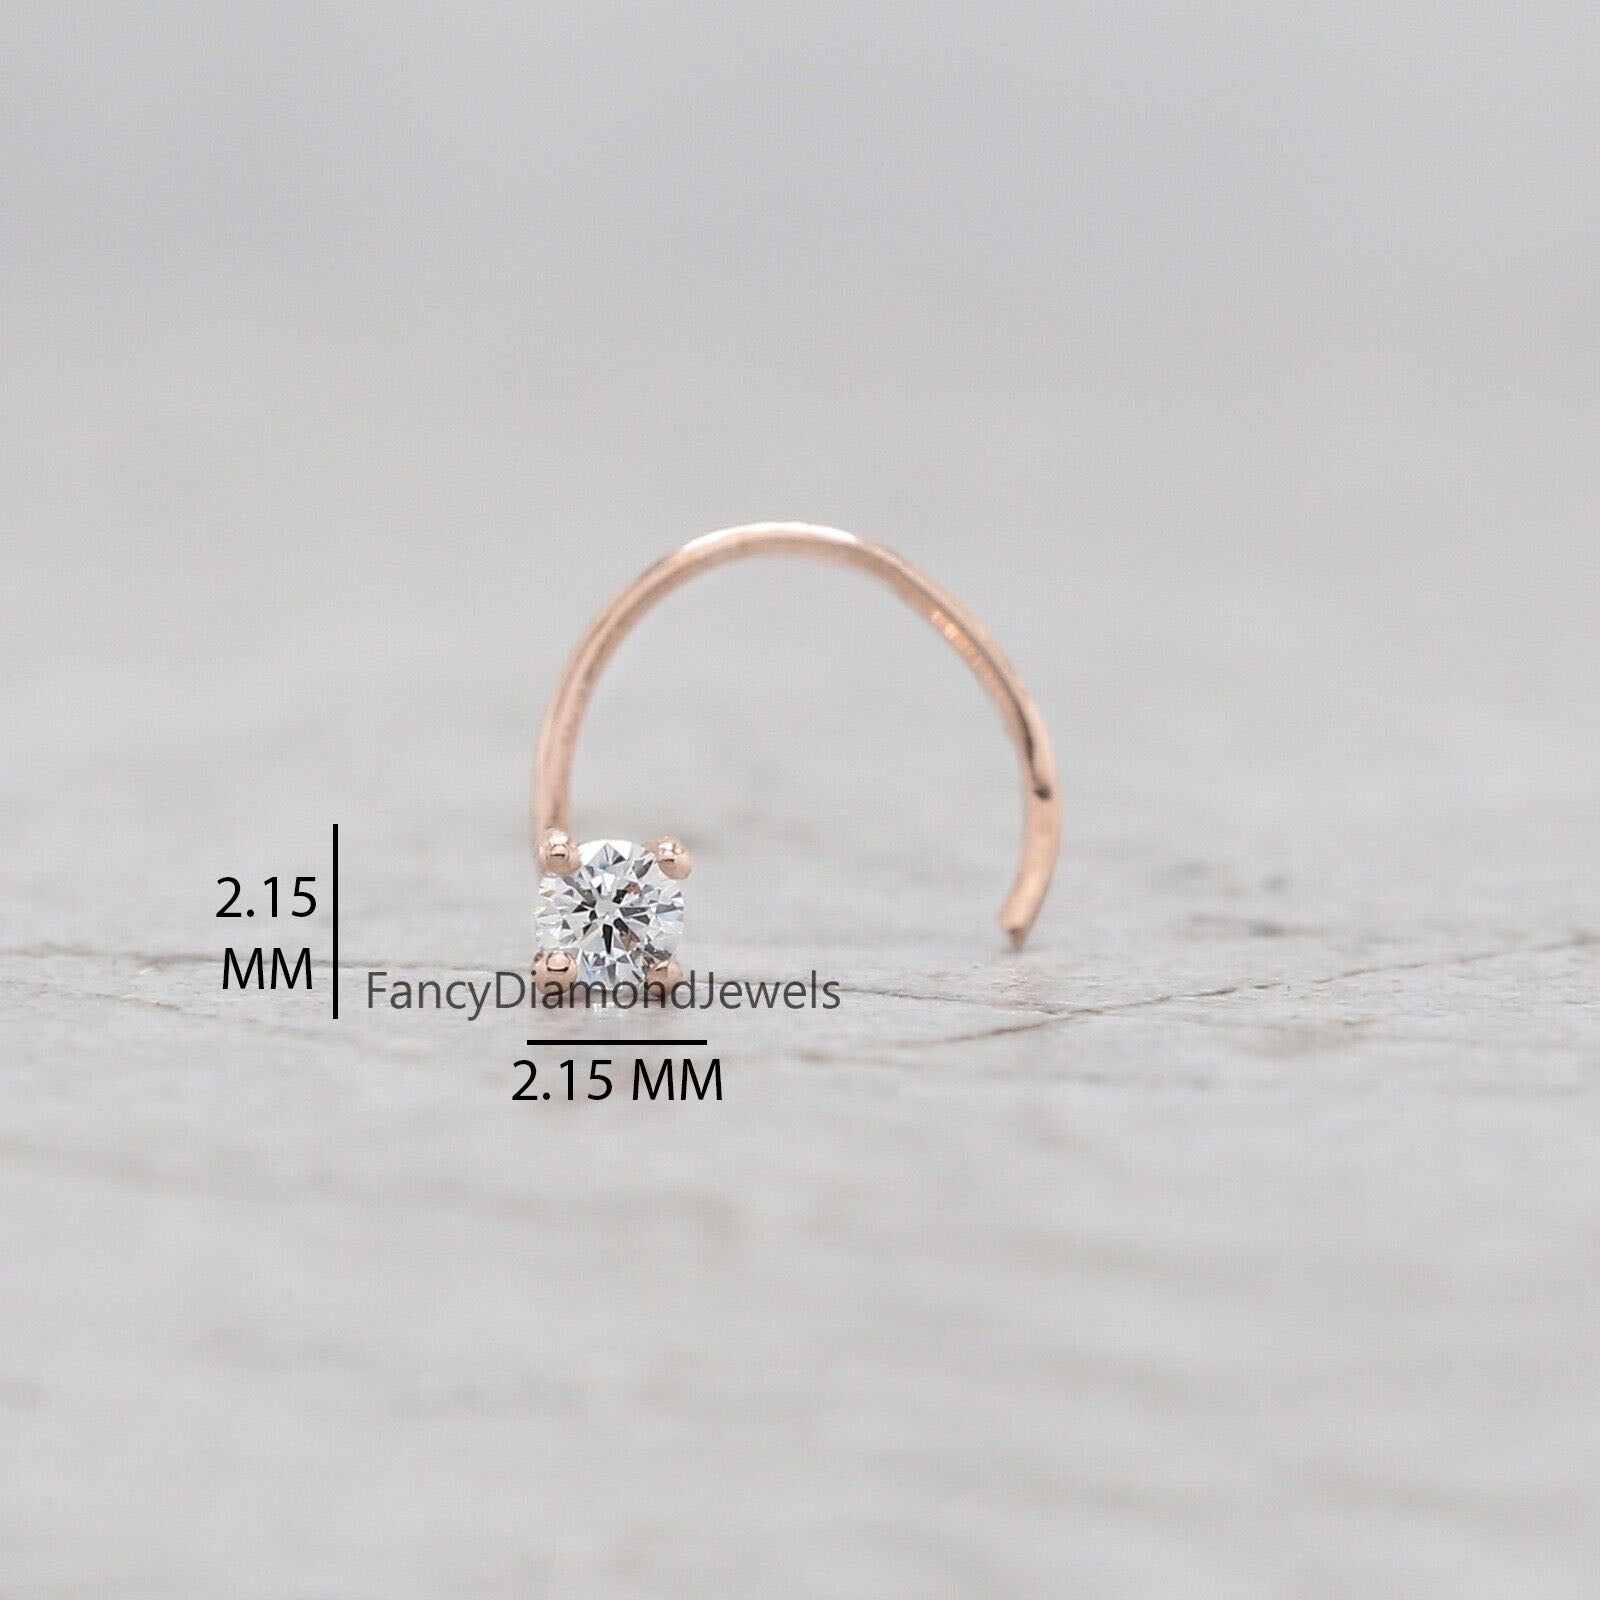 Buy Diamond Nose Ring, Diamond Piercing, Diamond Nose Hoop, Bling, High End  Jewelry, Solid 14K Yellow Gold Ring 1mm Genuine Diamonds, SKU 34 Online in  India - Etsy